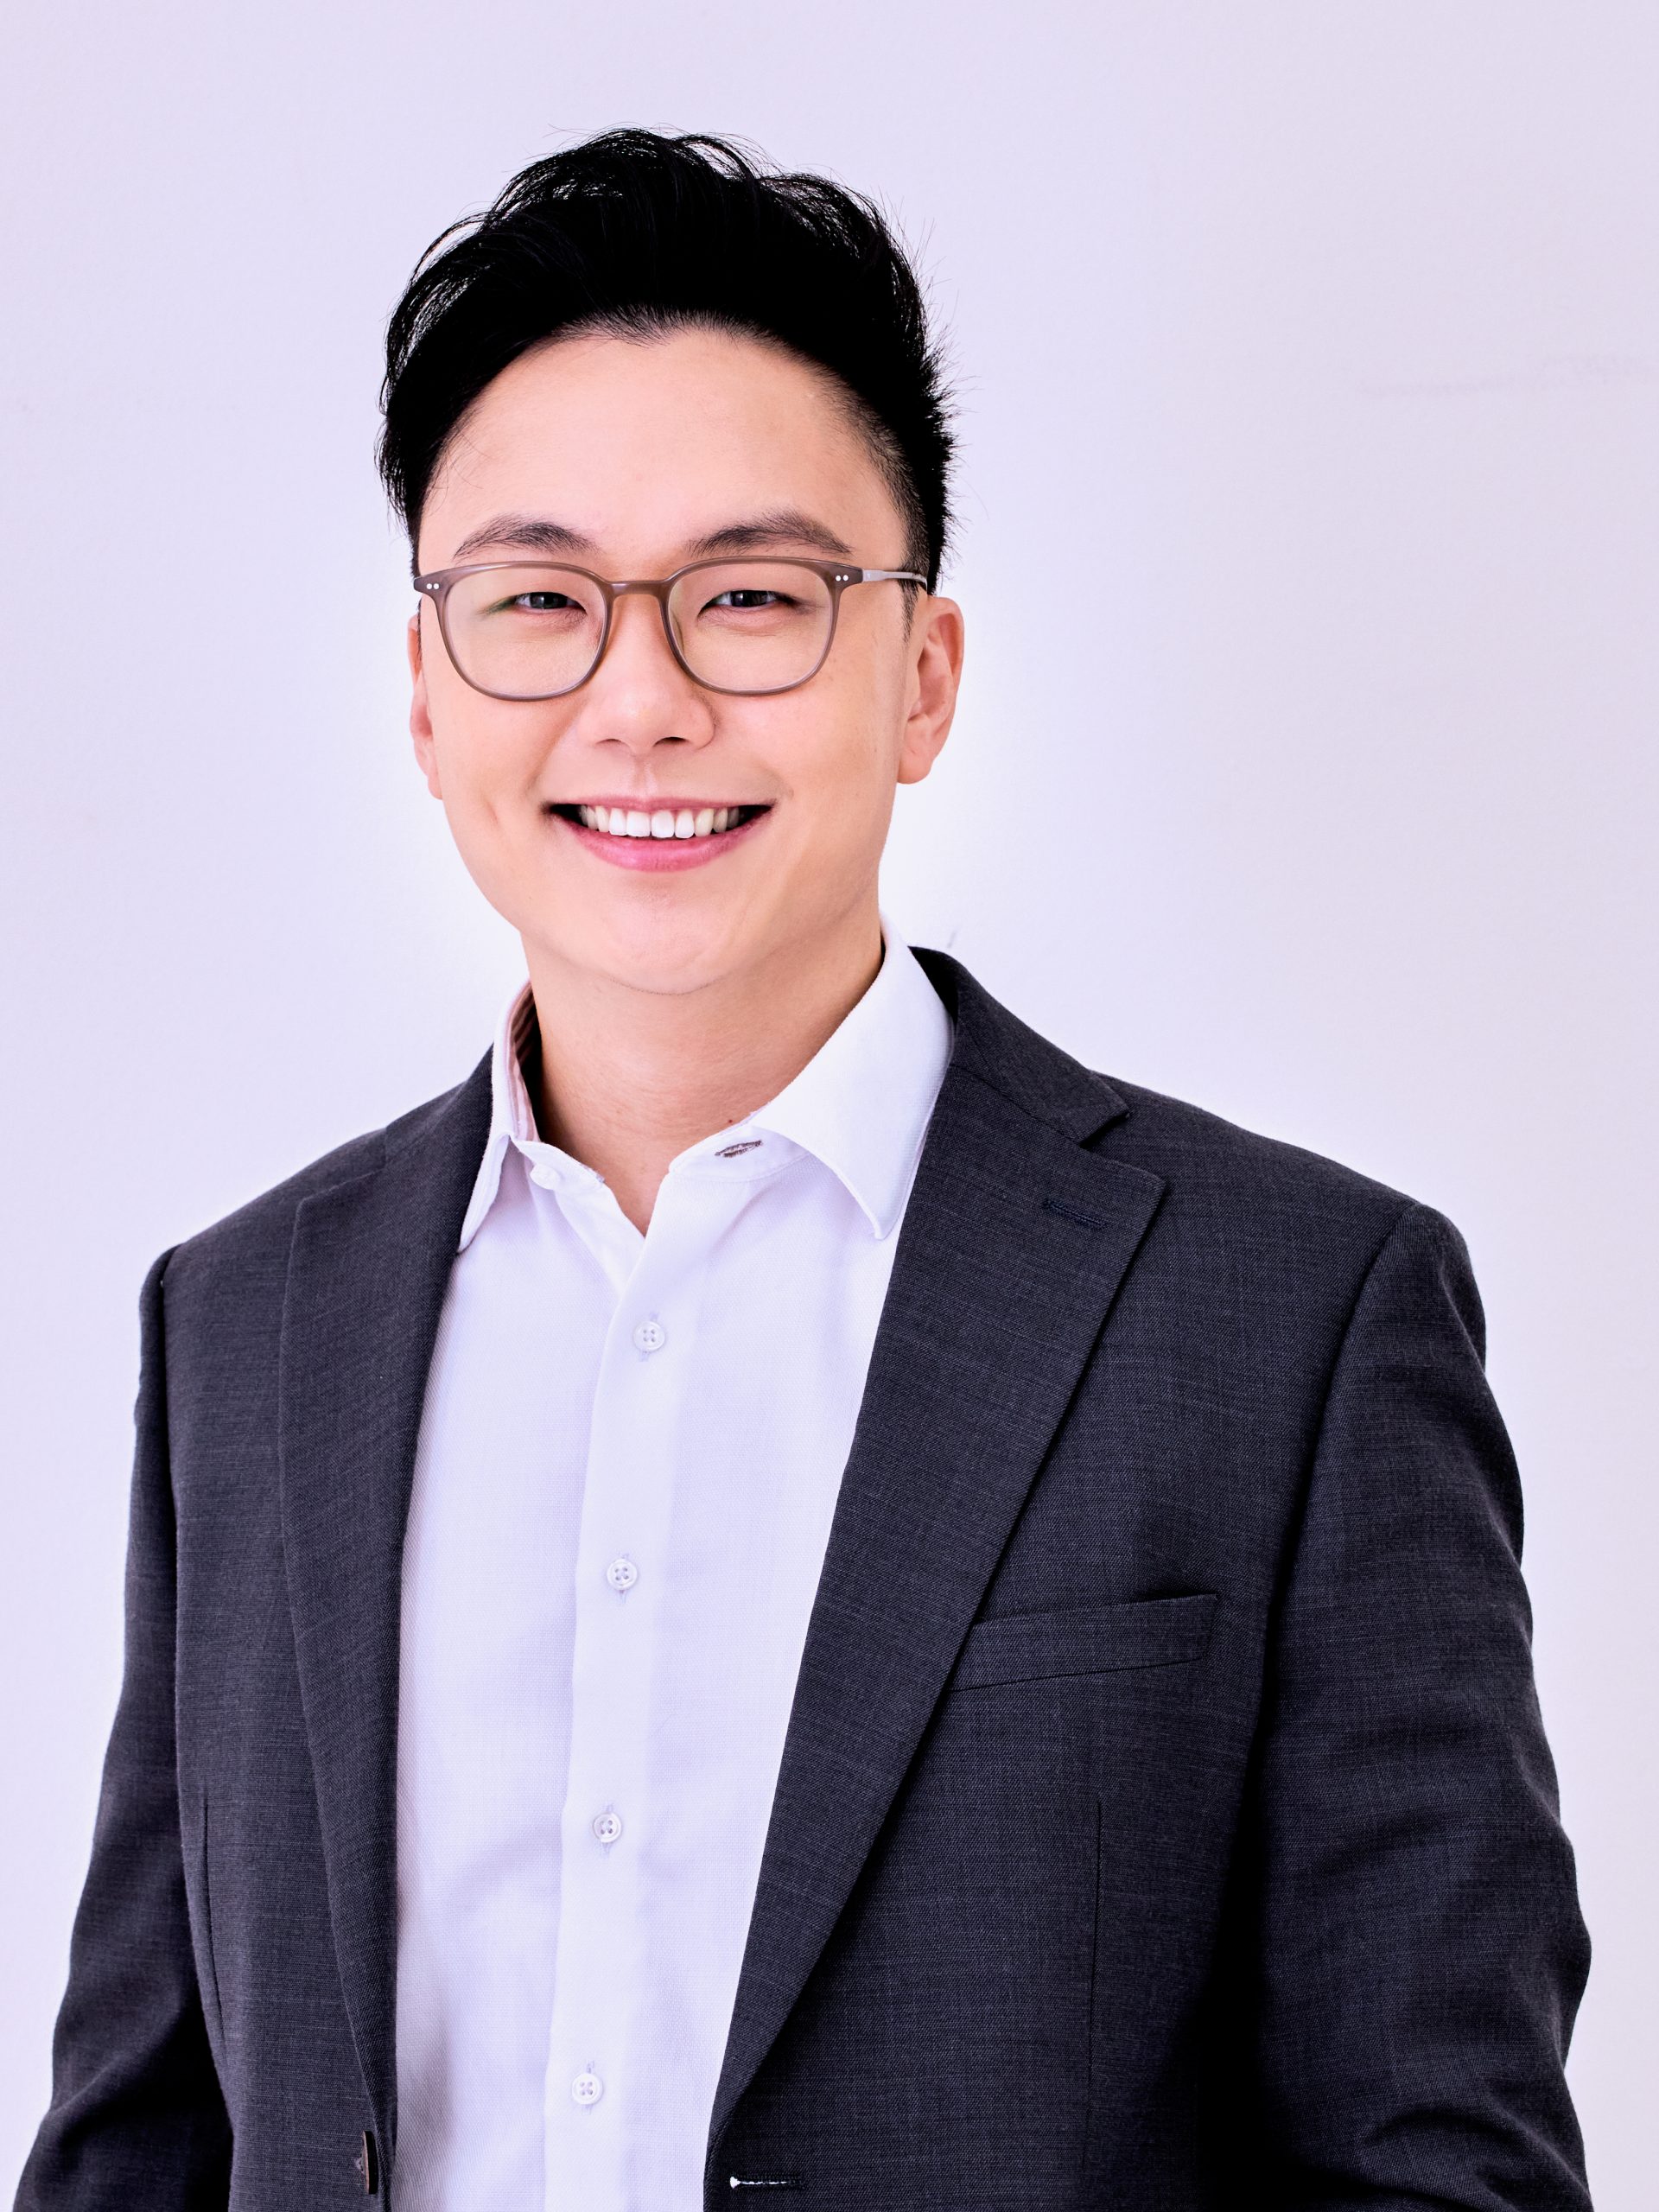 Dr. Russell Chen